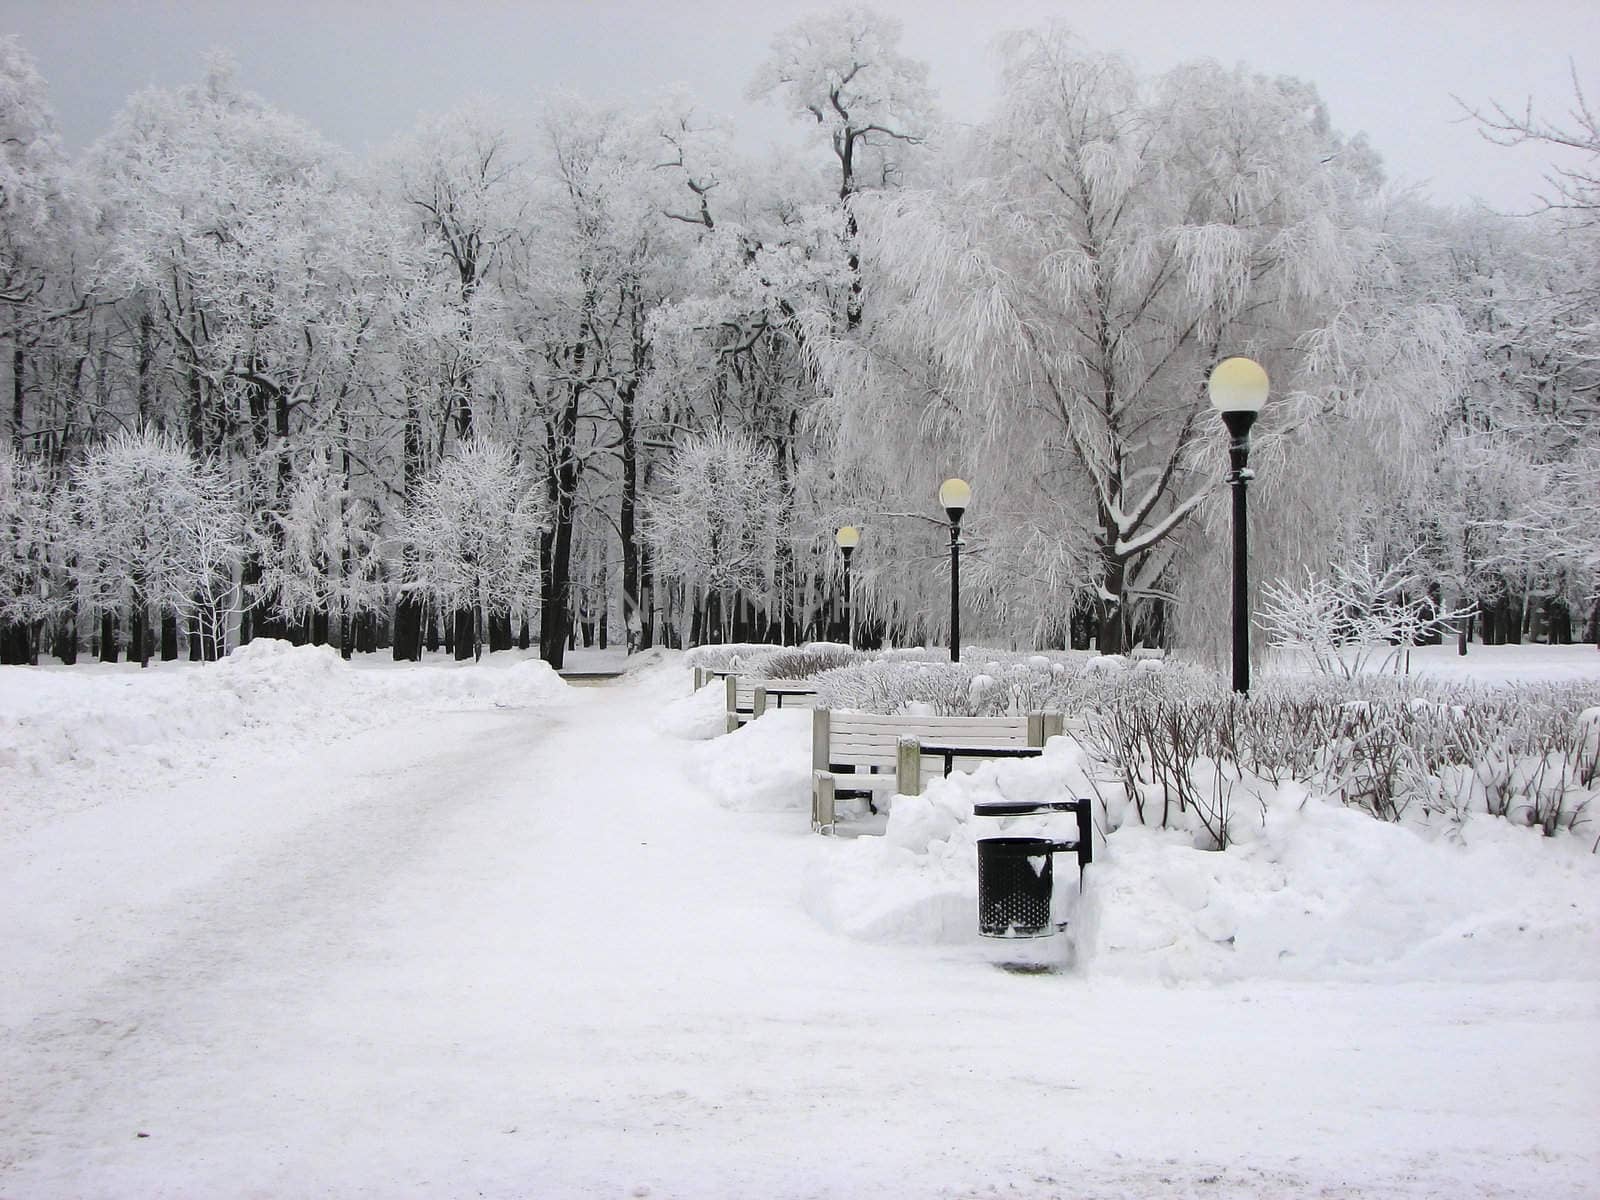 Snow covered benches and trees in park